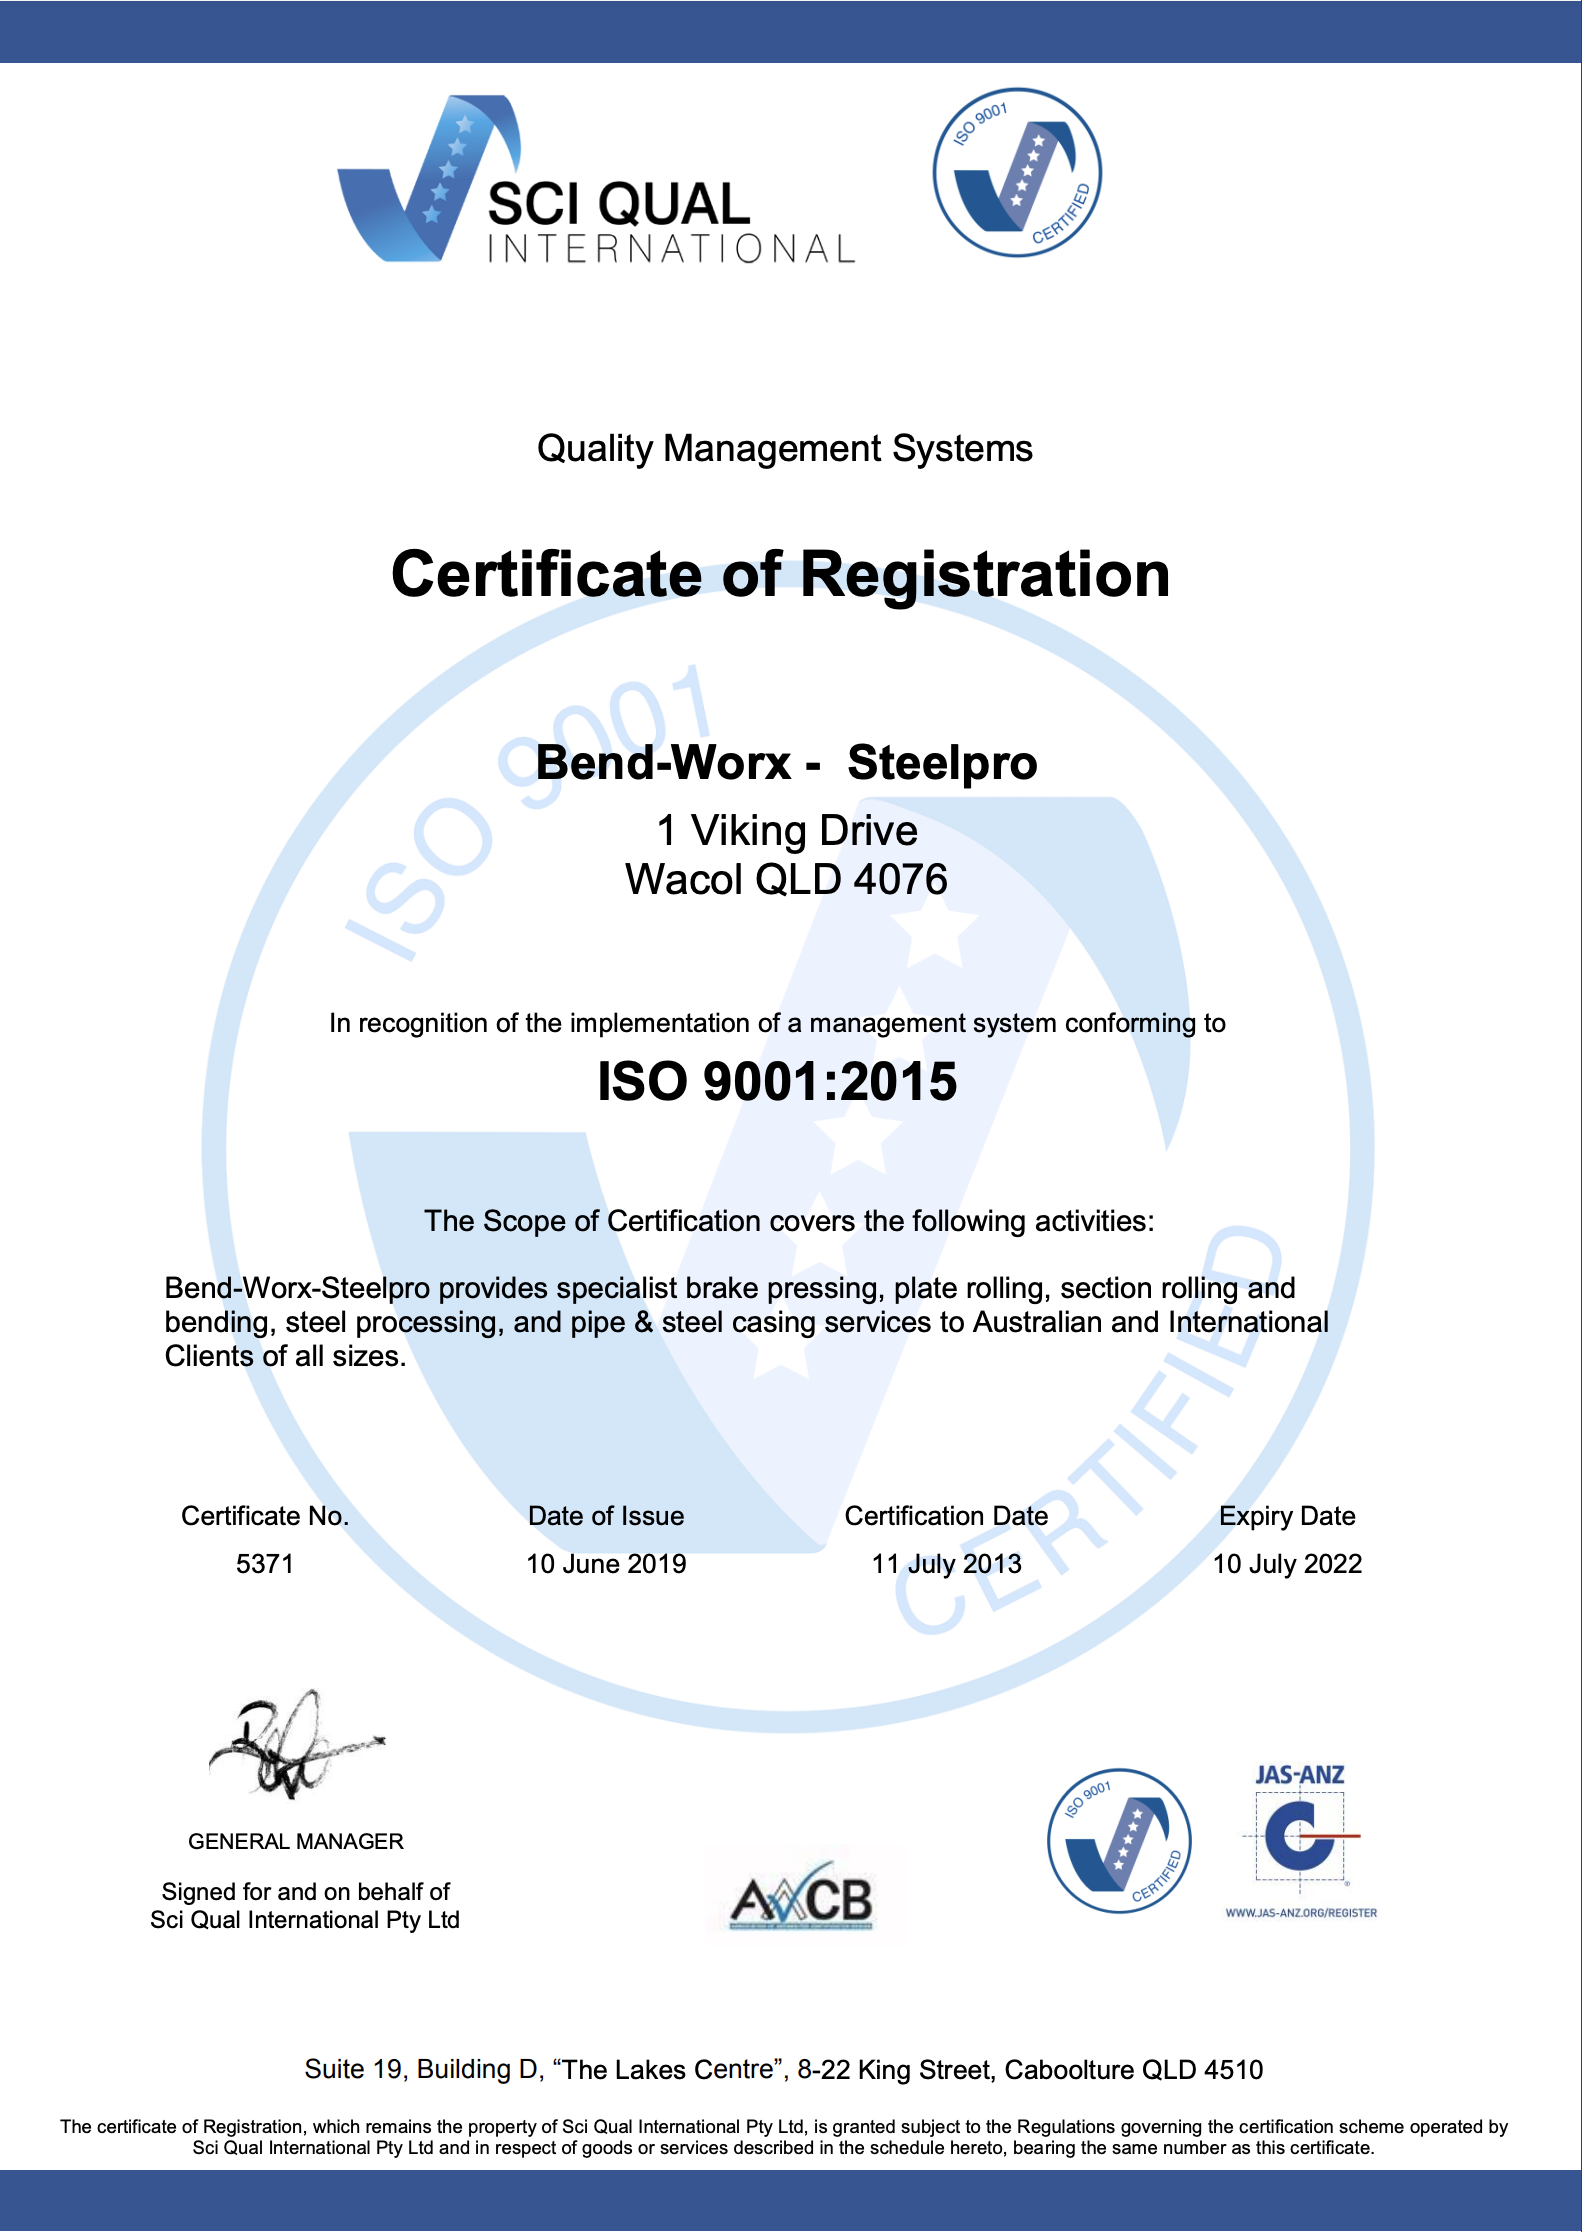 ISO 9001 Certification 